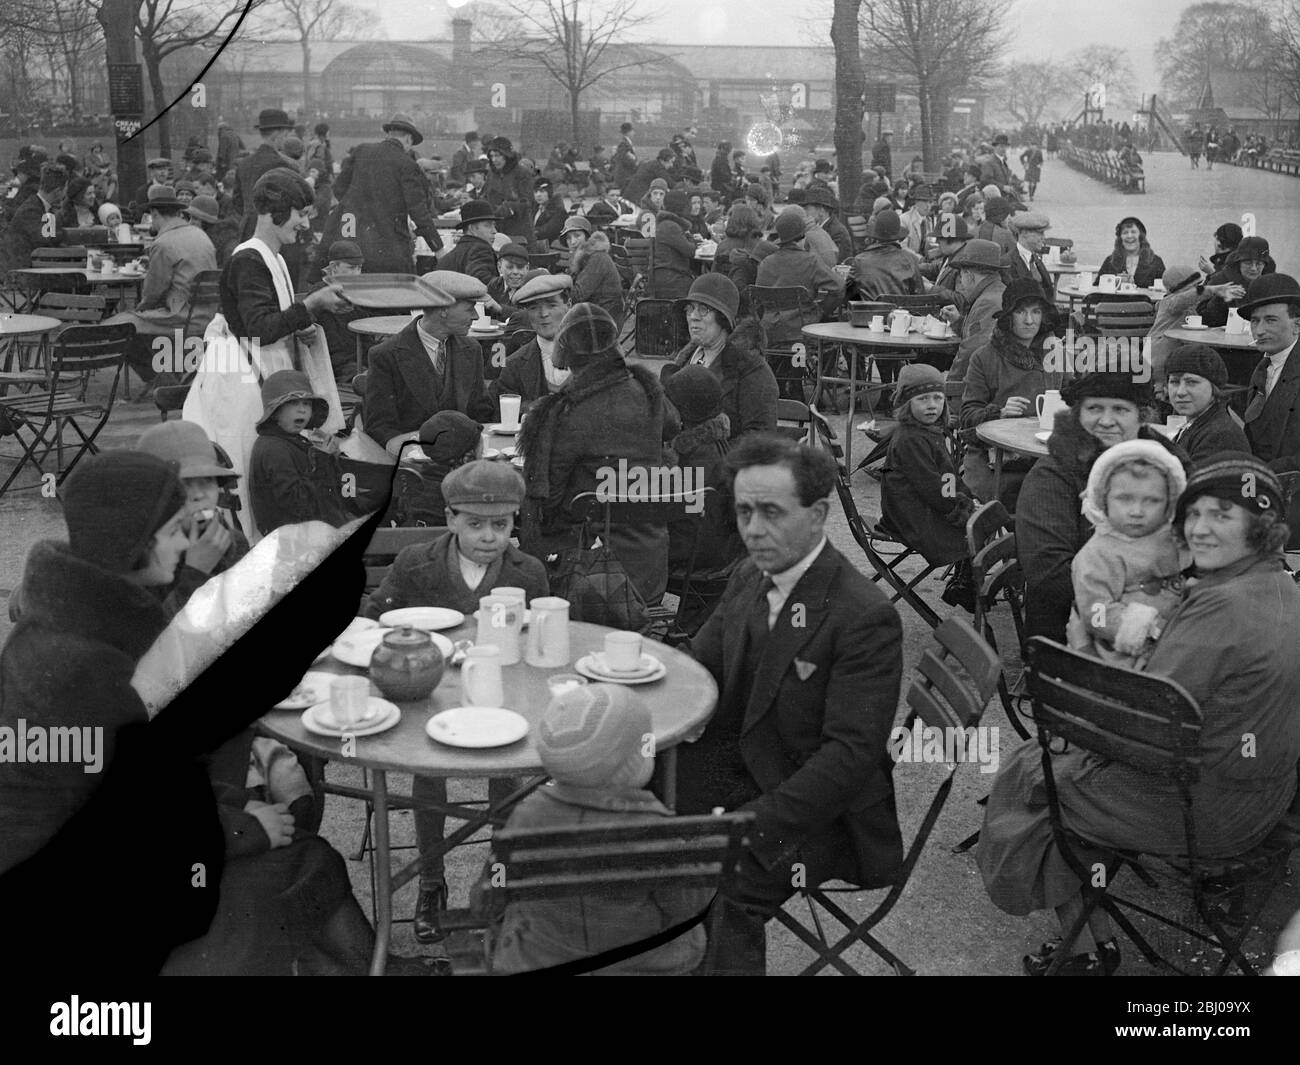 Bank holiday at the zoo . - Huge crowds thronged the London Zoo on Easter Monday . - Crowds enjoying lunch at the Zoo during their Bank Holiday visit . - 28 March 1932 Stock Photo